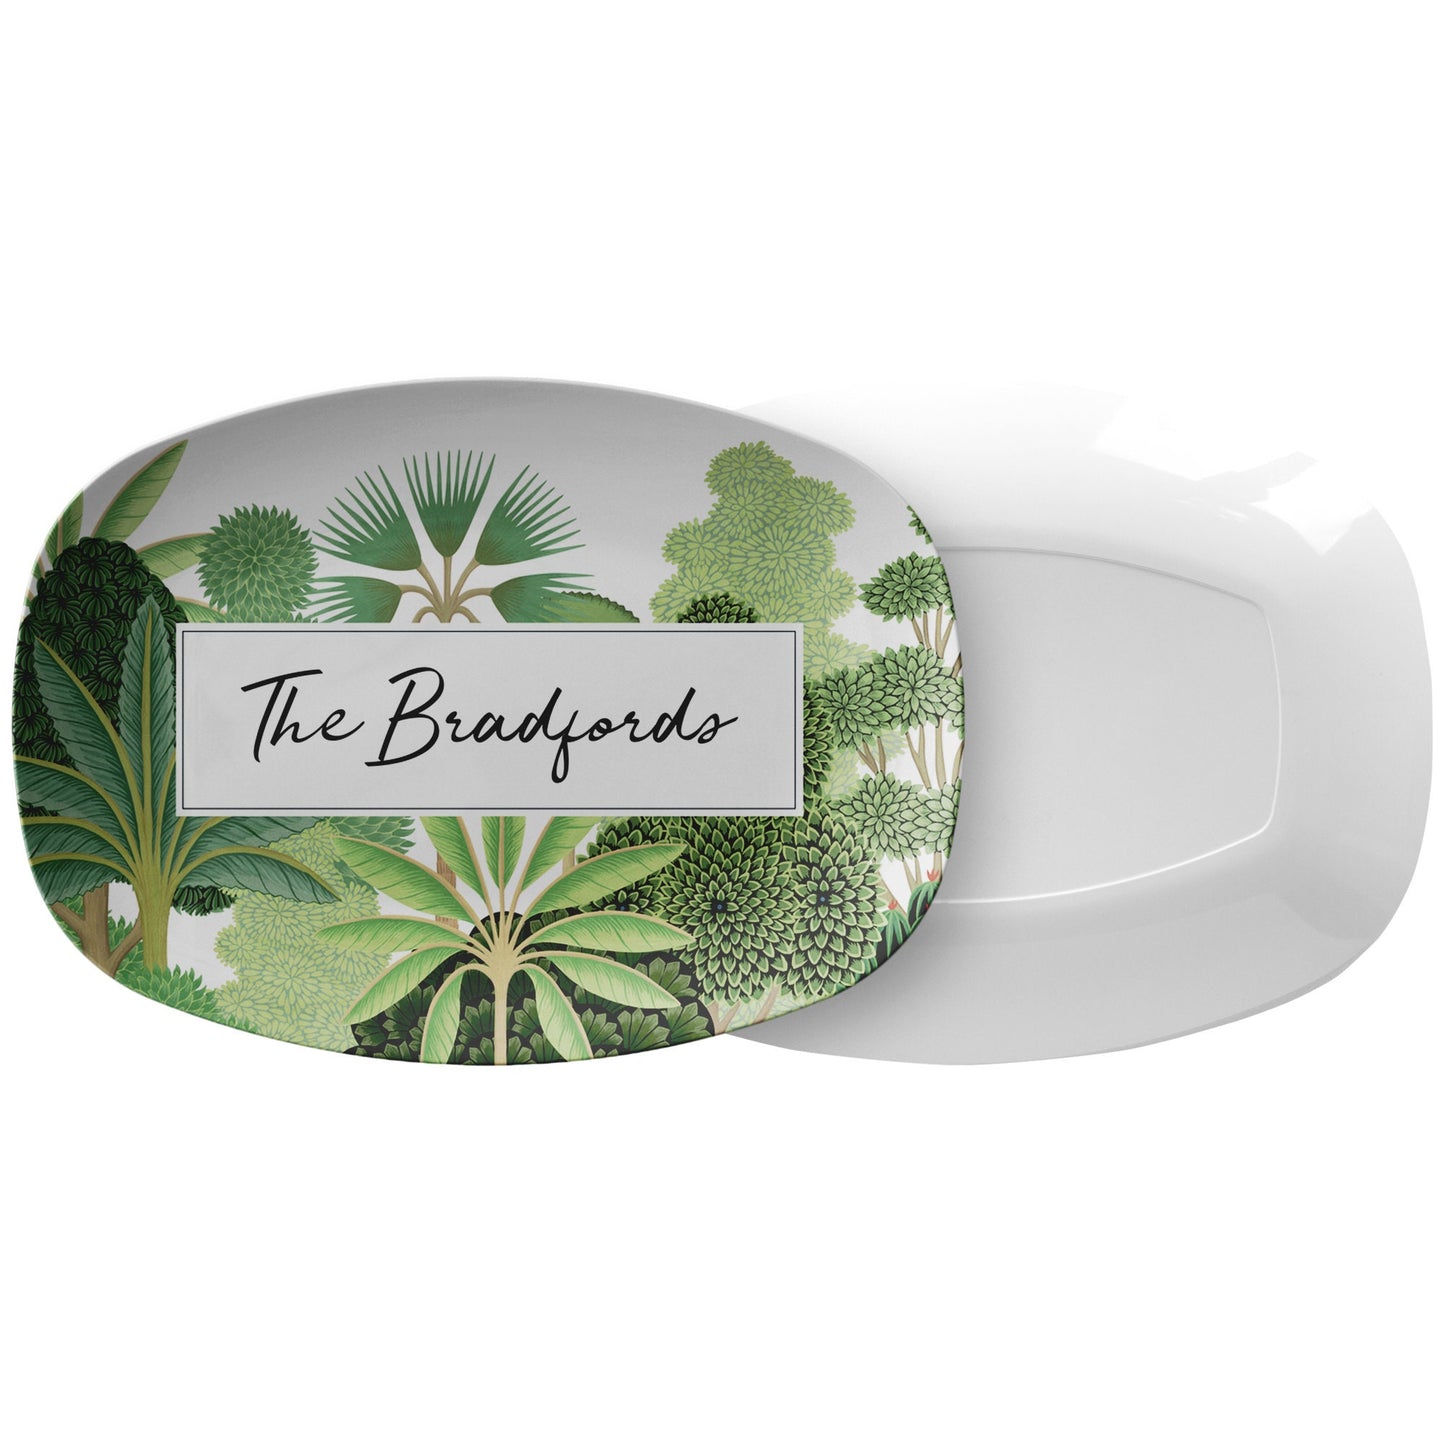 Personalized Serving Platter, Tropical Gardens, White and Green, Luxury Plastic